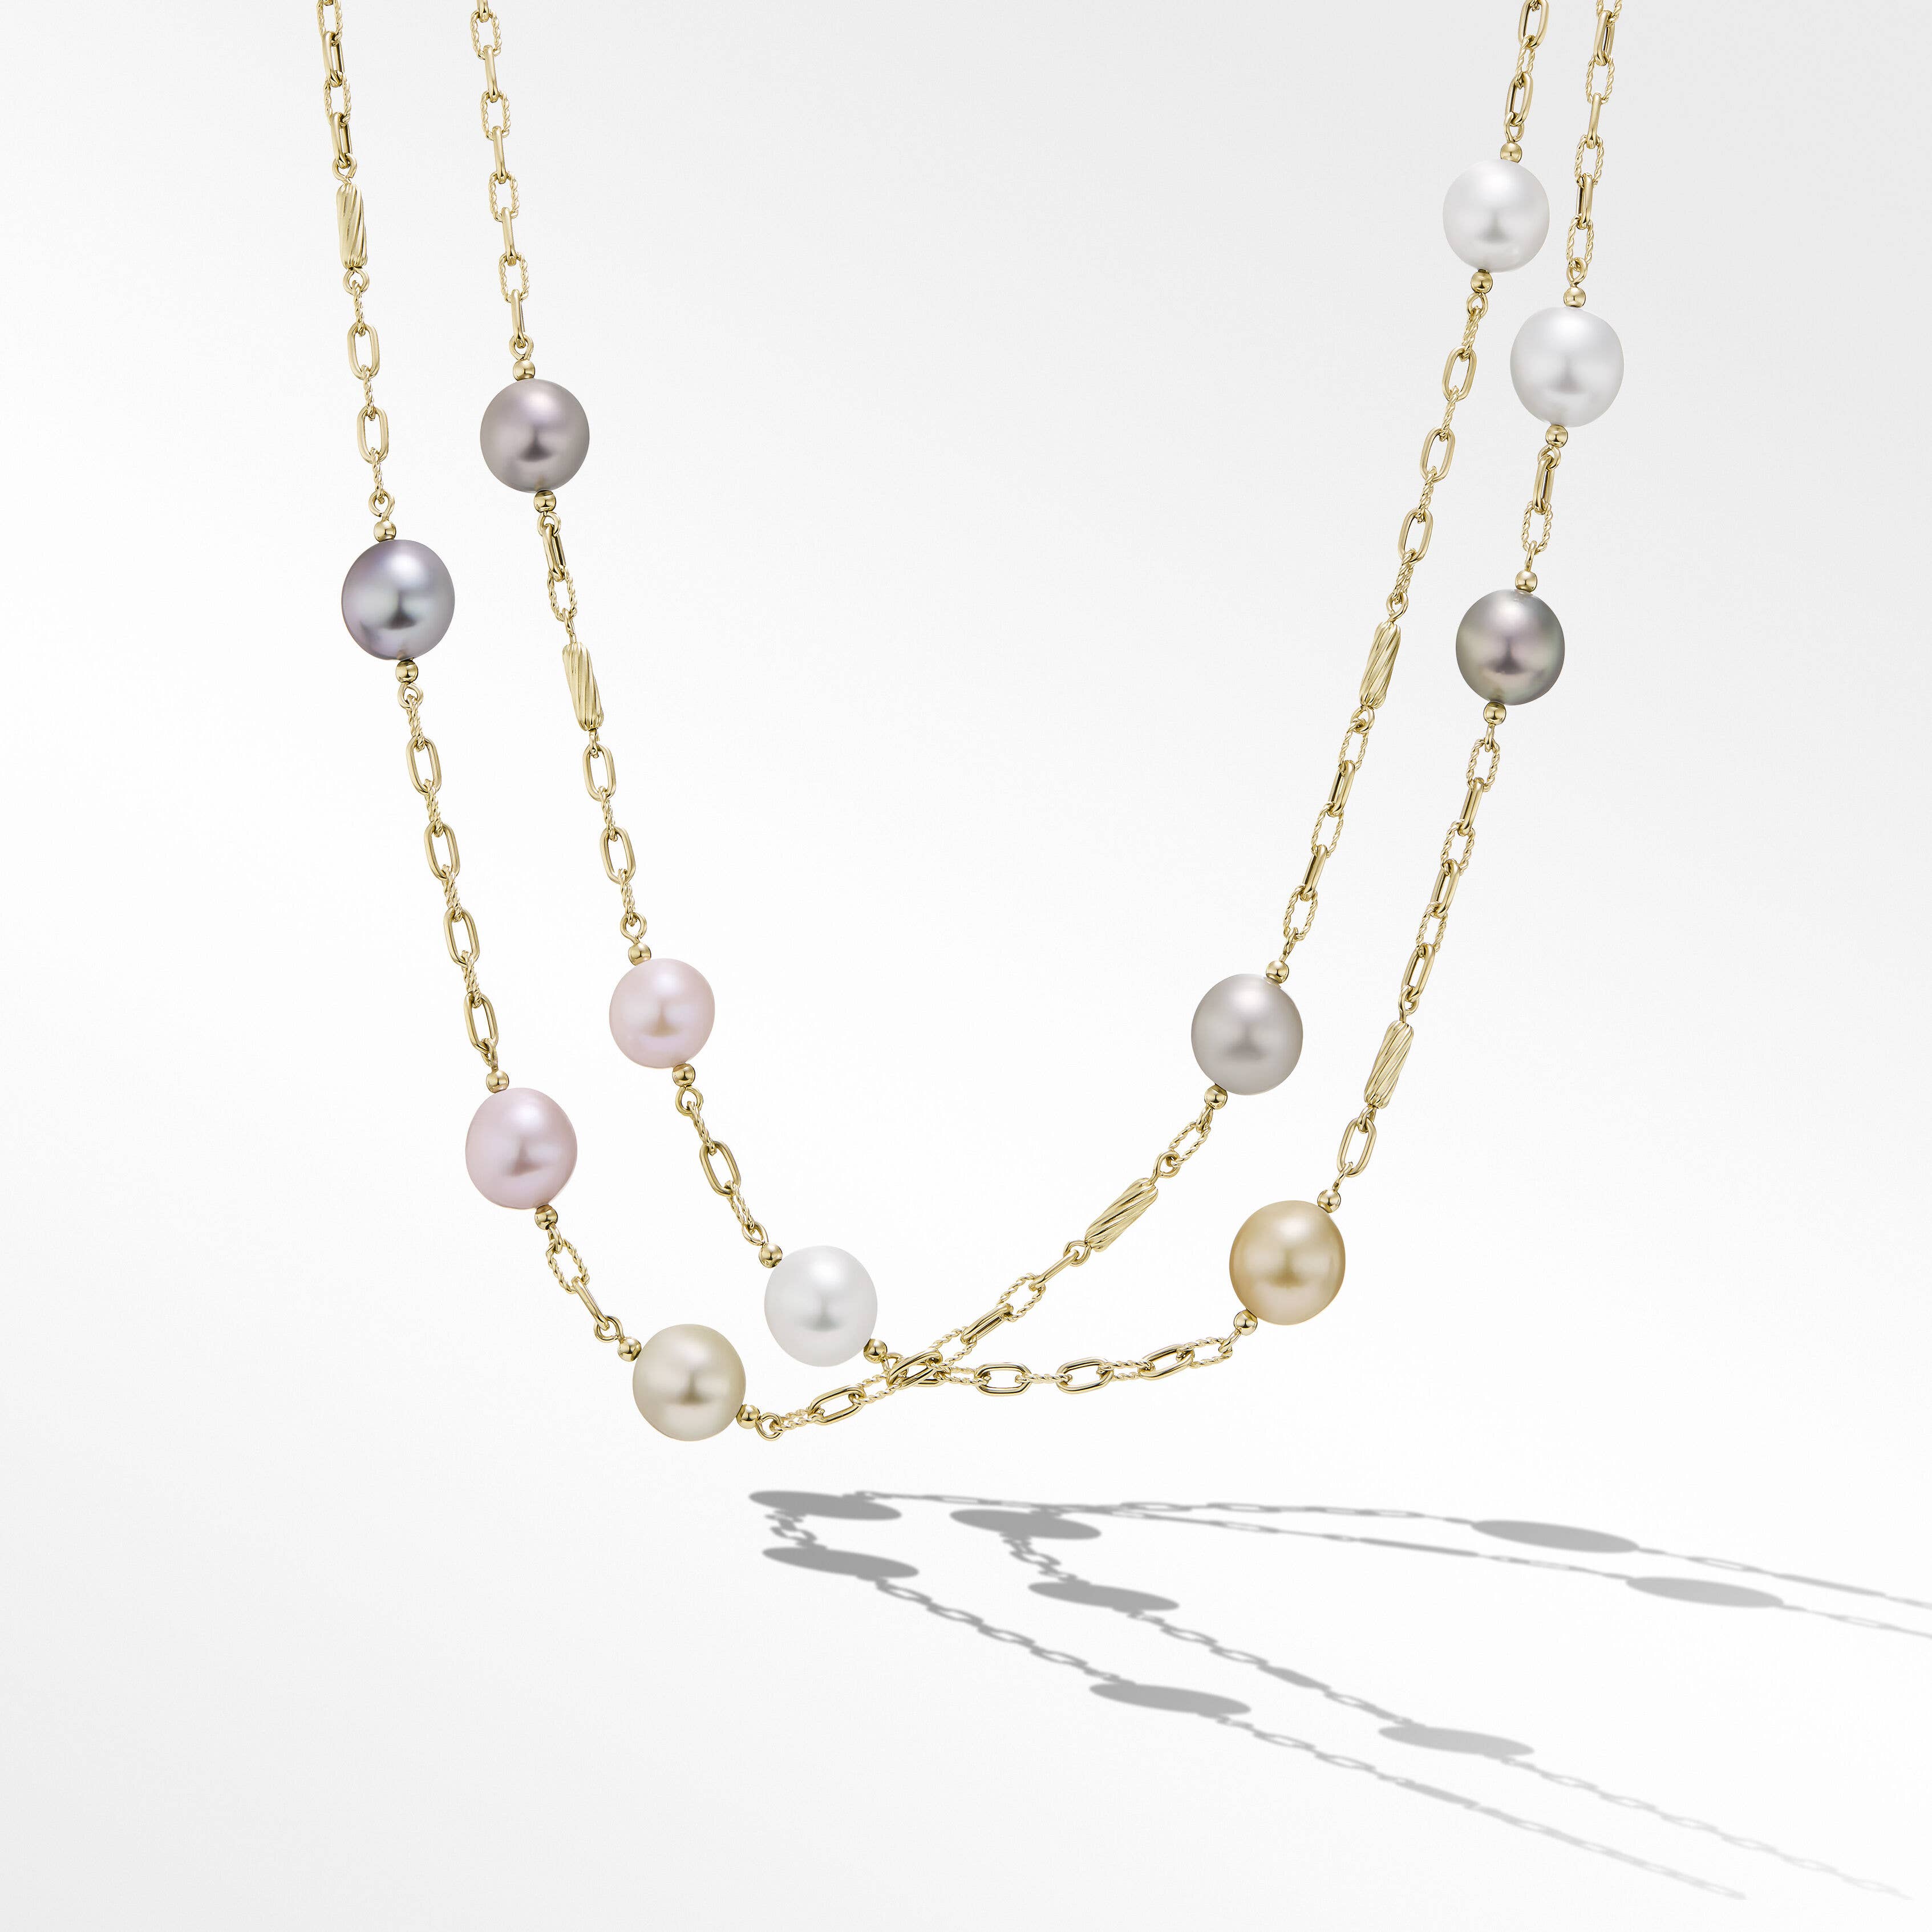 DY Madison® Colour Pearl Necklace in 18K Yellow Gold